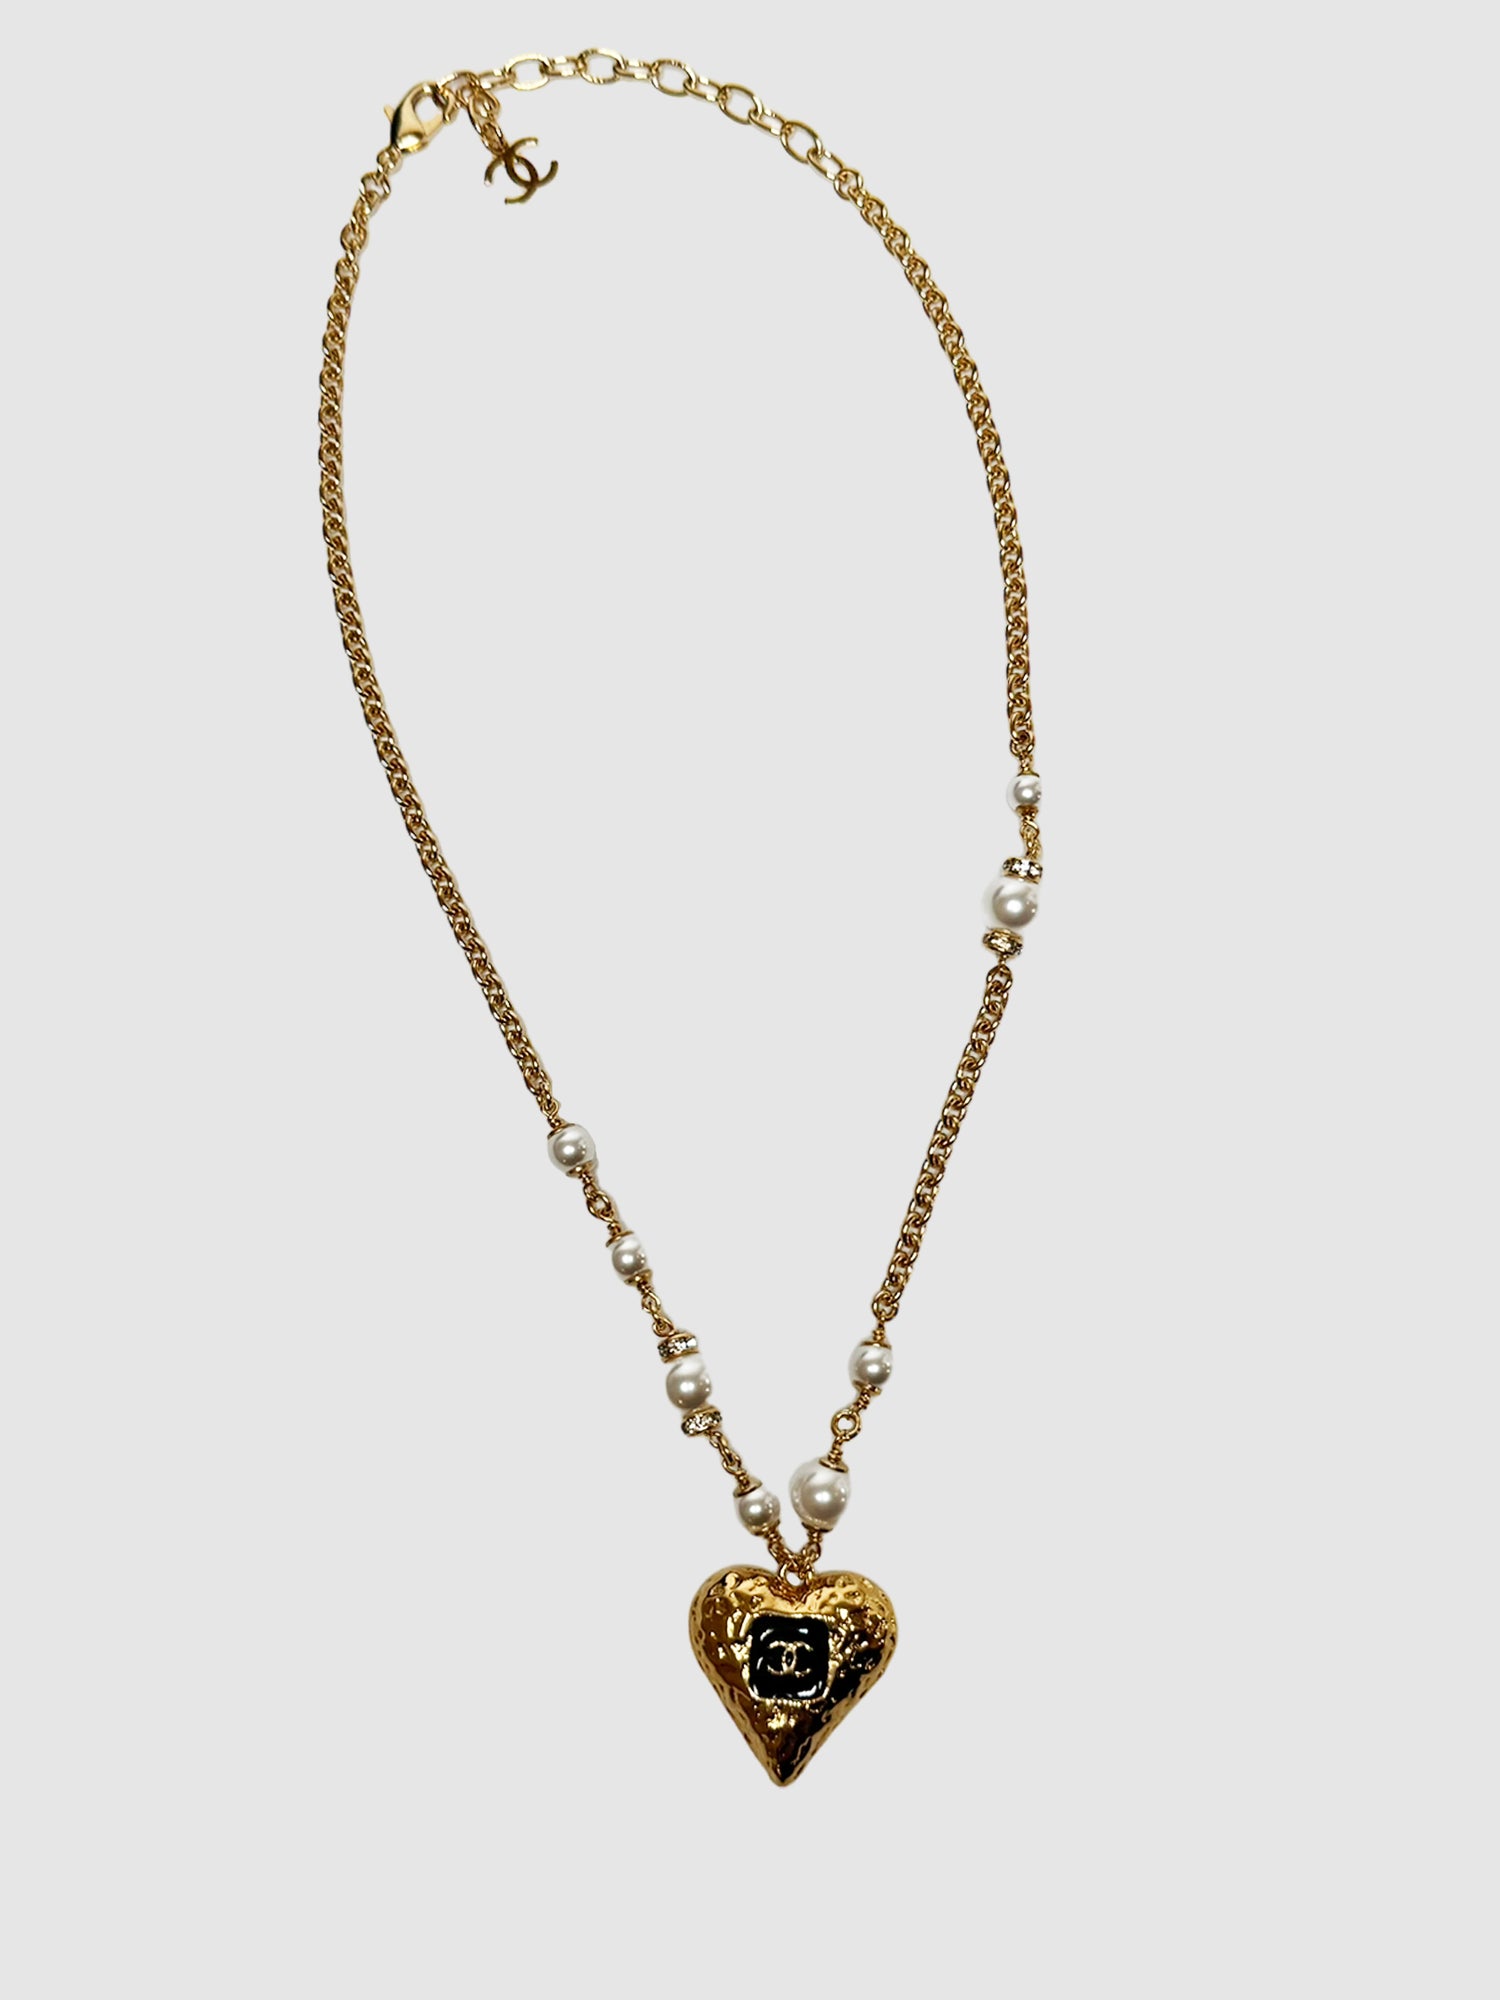 Chanel Gold-Plated CC Heart Pendant Necklace Vintage Trendy Consignment Secondhand Luxury